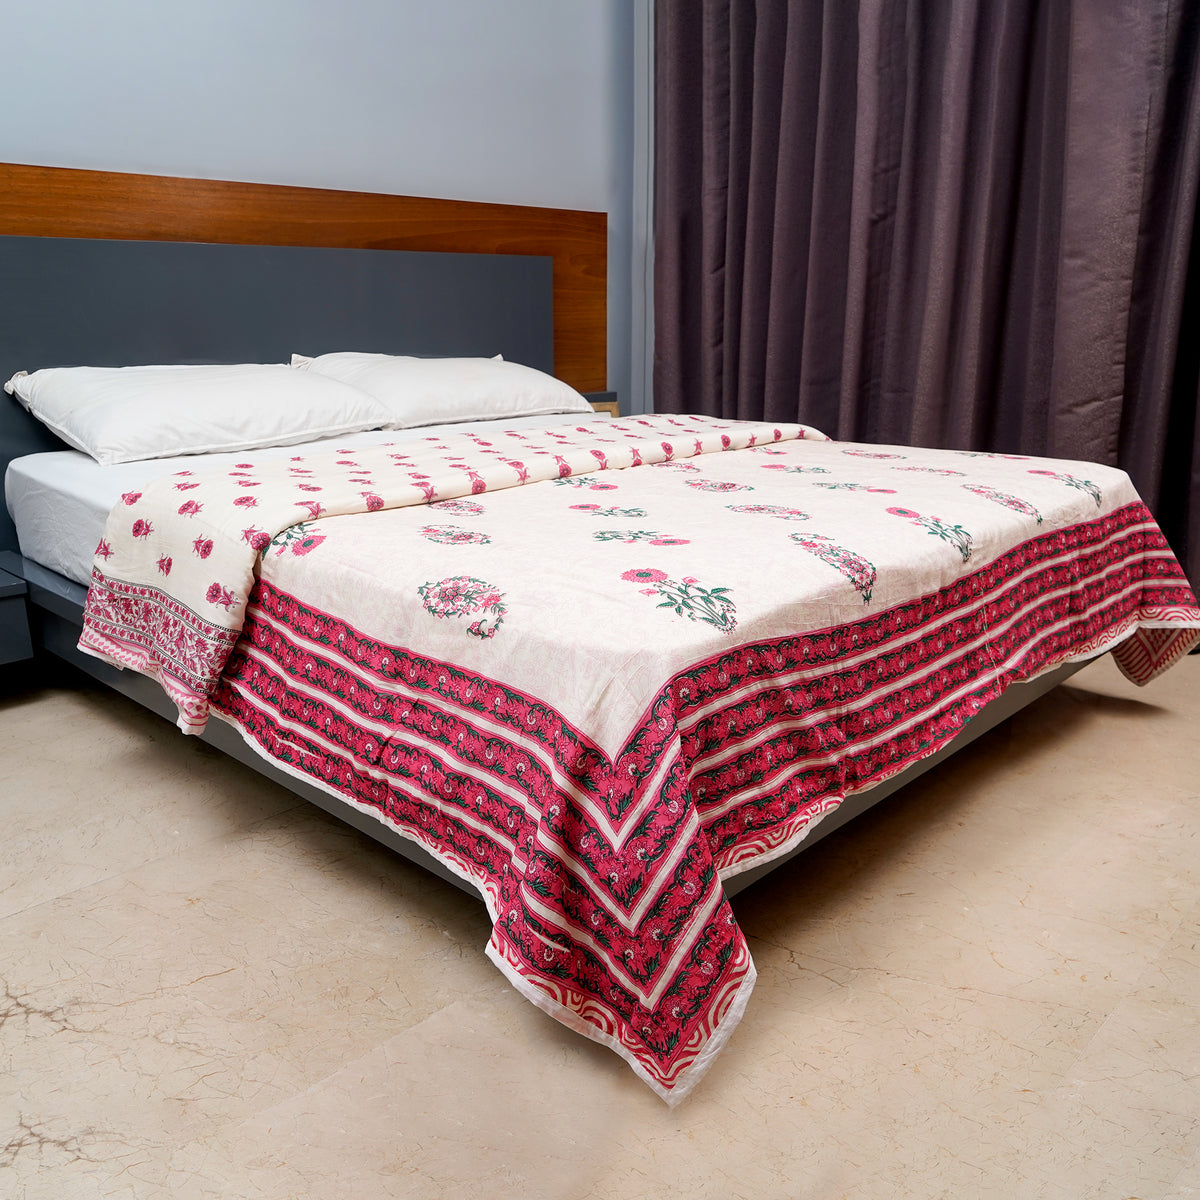 Inizio Pure Cotton Reversible Double Bed A/C Dohar Soft Lightweight Breathable Blanket Floral Printed Design Cream & Pink